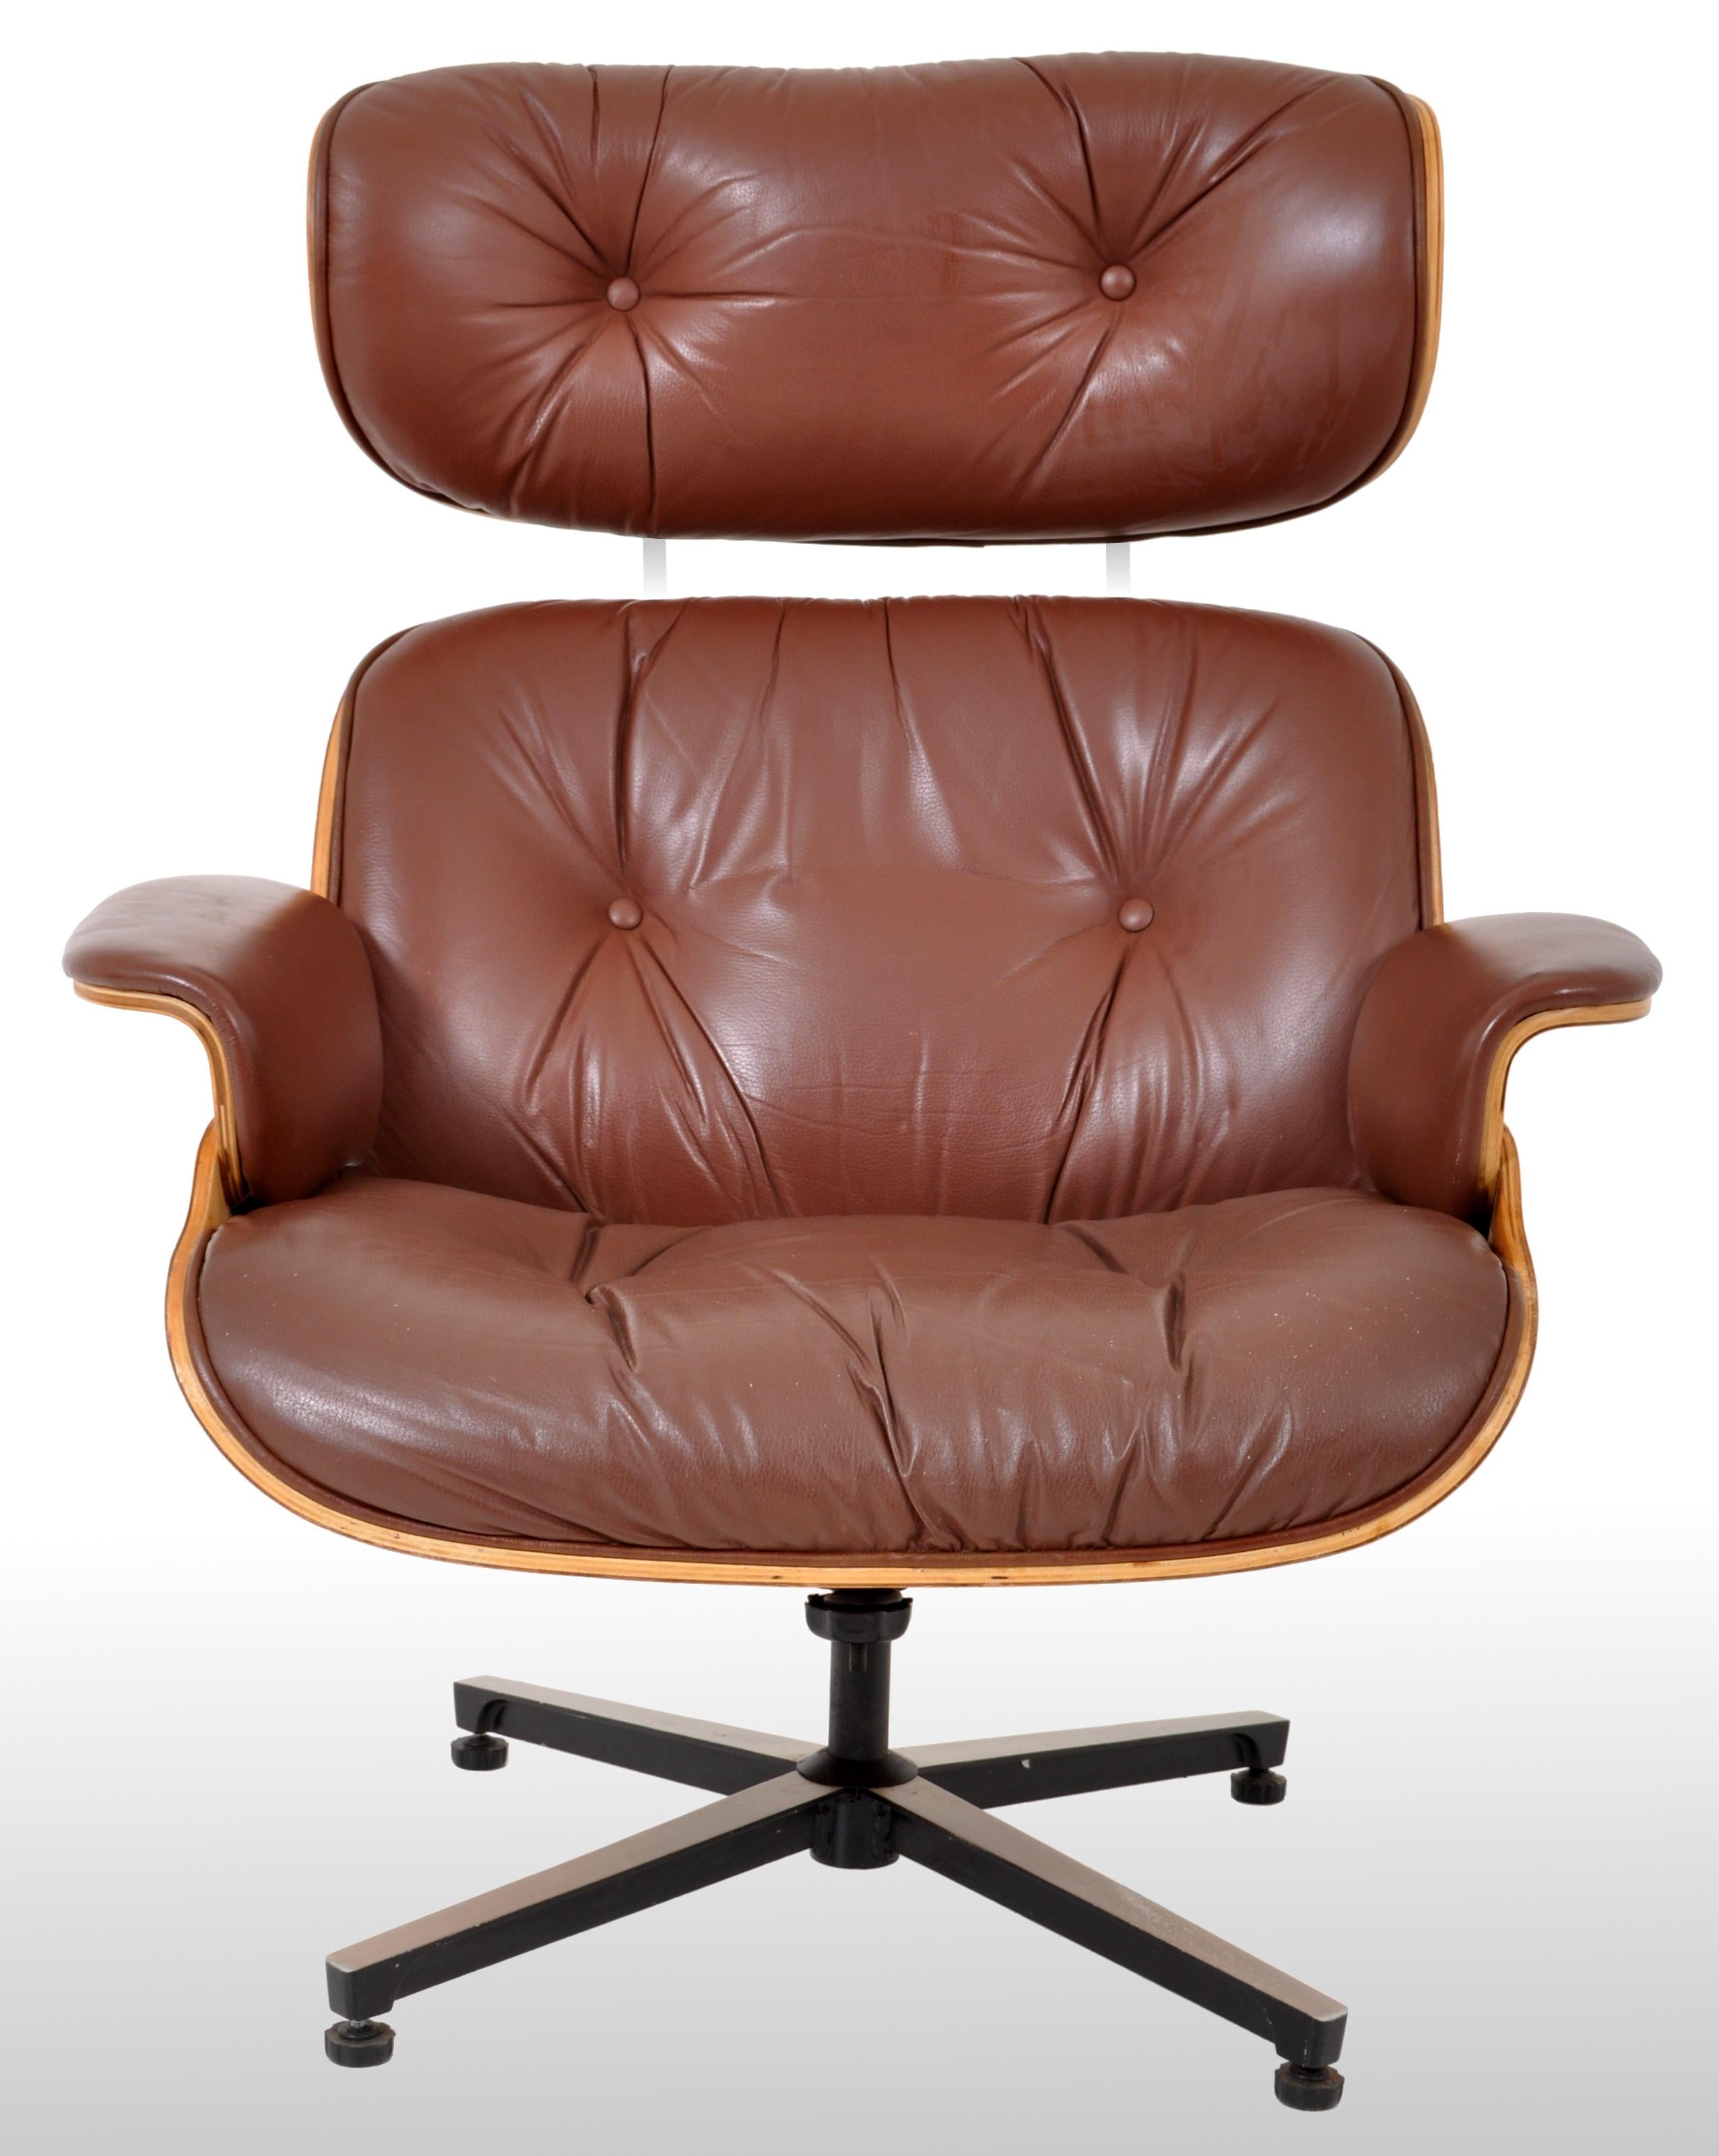 American Mid-Century Modern Plycraft Eames 670/71 Lounge Chair Recliner and Ottoman 1960s